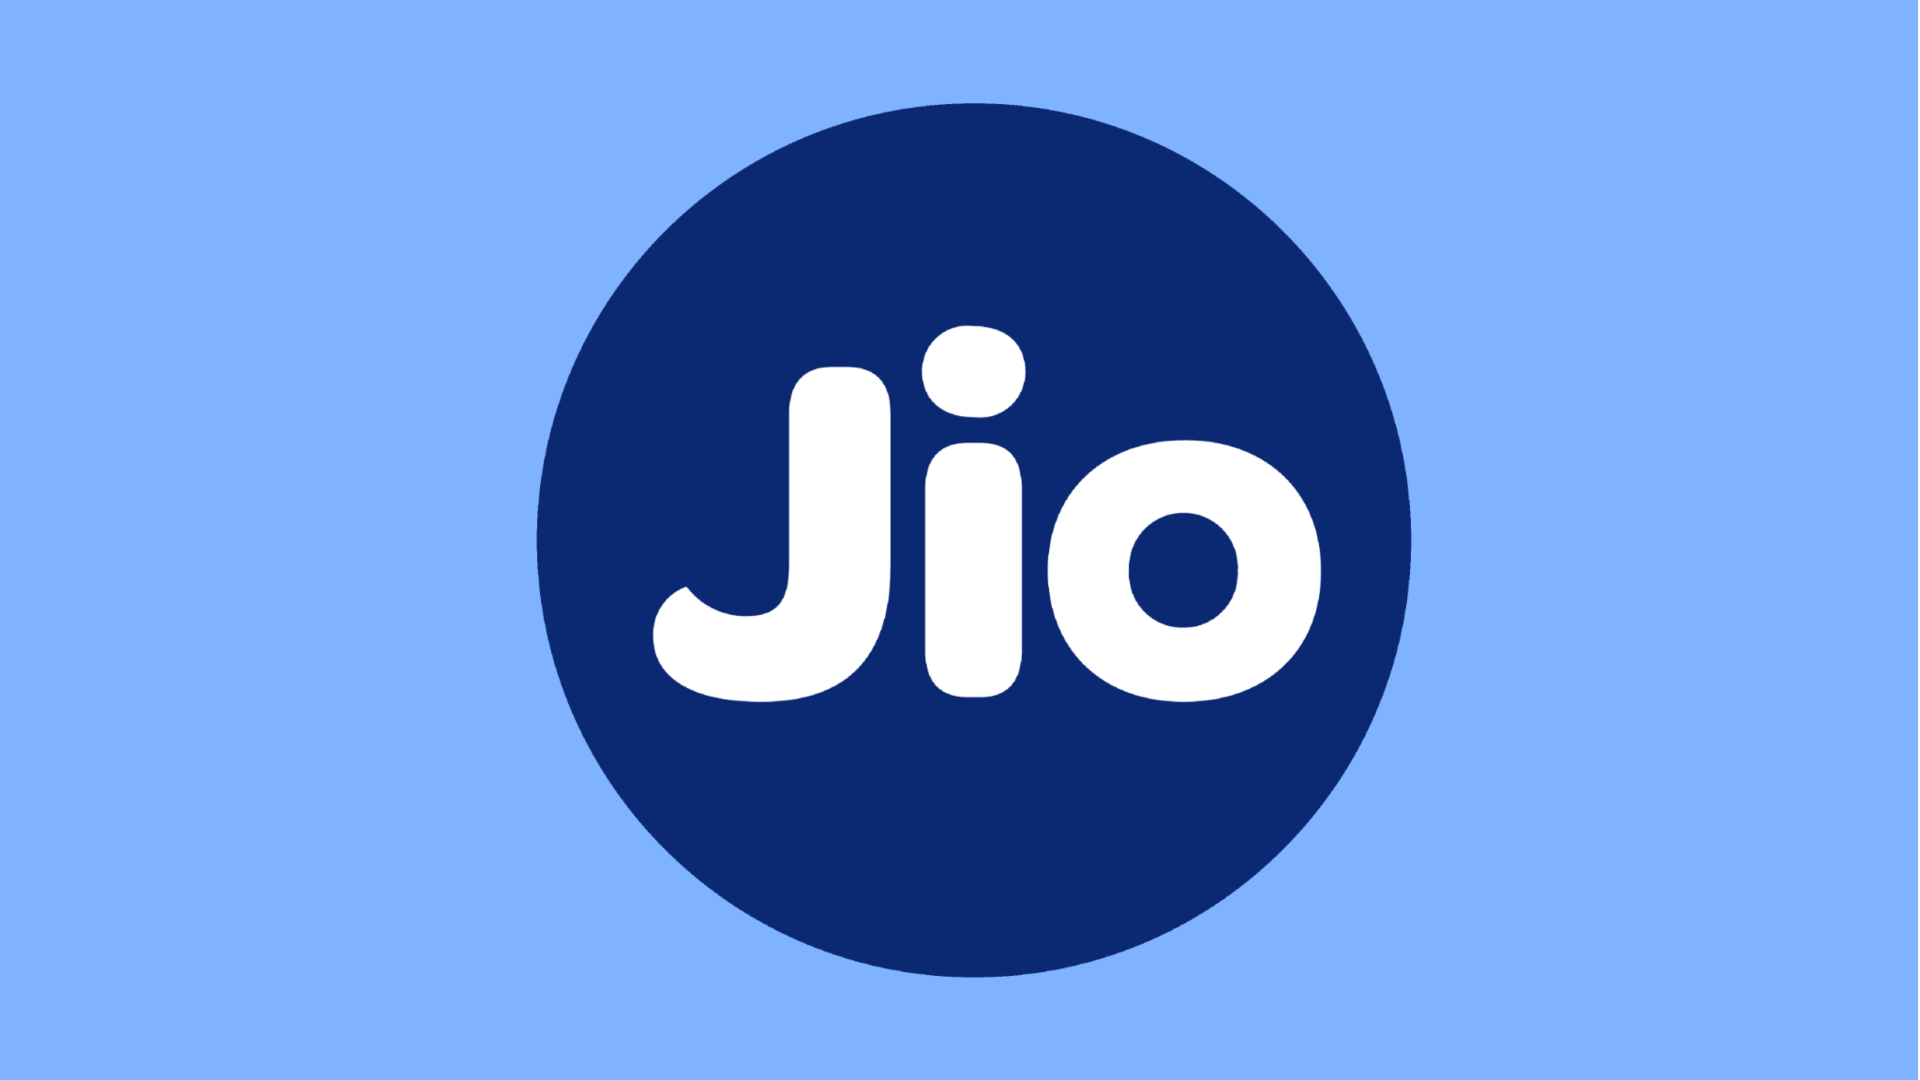 These Jio prepaid plans offer 1.5GB of data per day